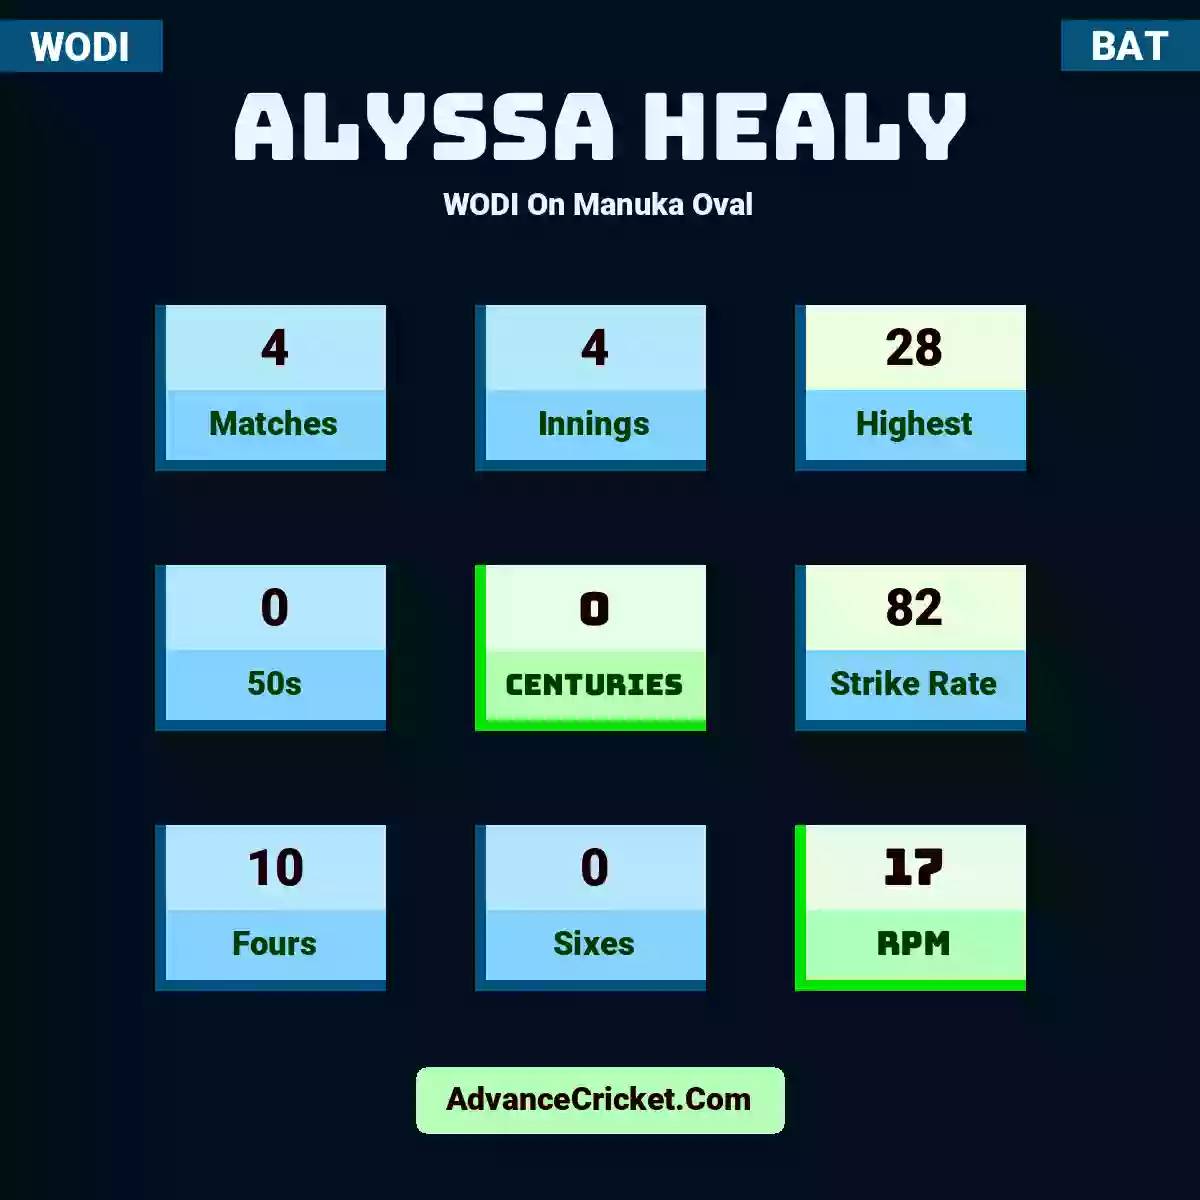 Alyssa Healy WODI  On Manuka Oval, Alyssa Healy played 4 matches, scored 28 runs as highest, 0 half-centuries, and 0 centuries, with a strike rate of 82. A.Healy hit 10 fours and 0 sixes, with an RPM of 17.